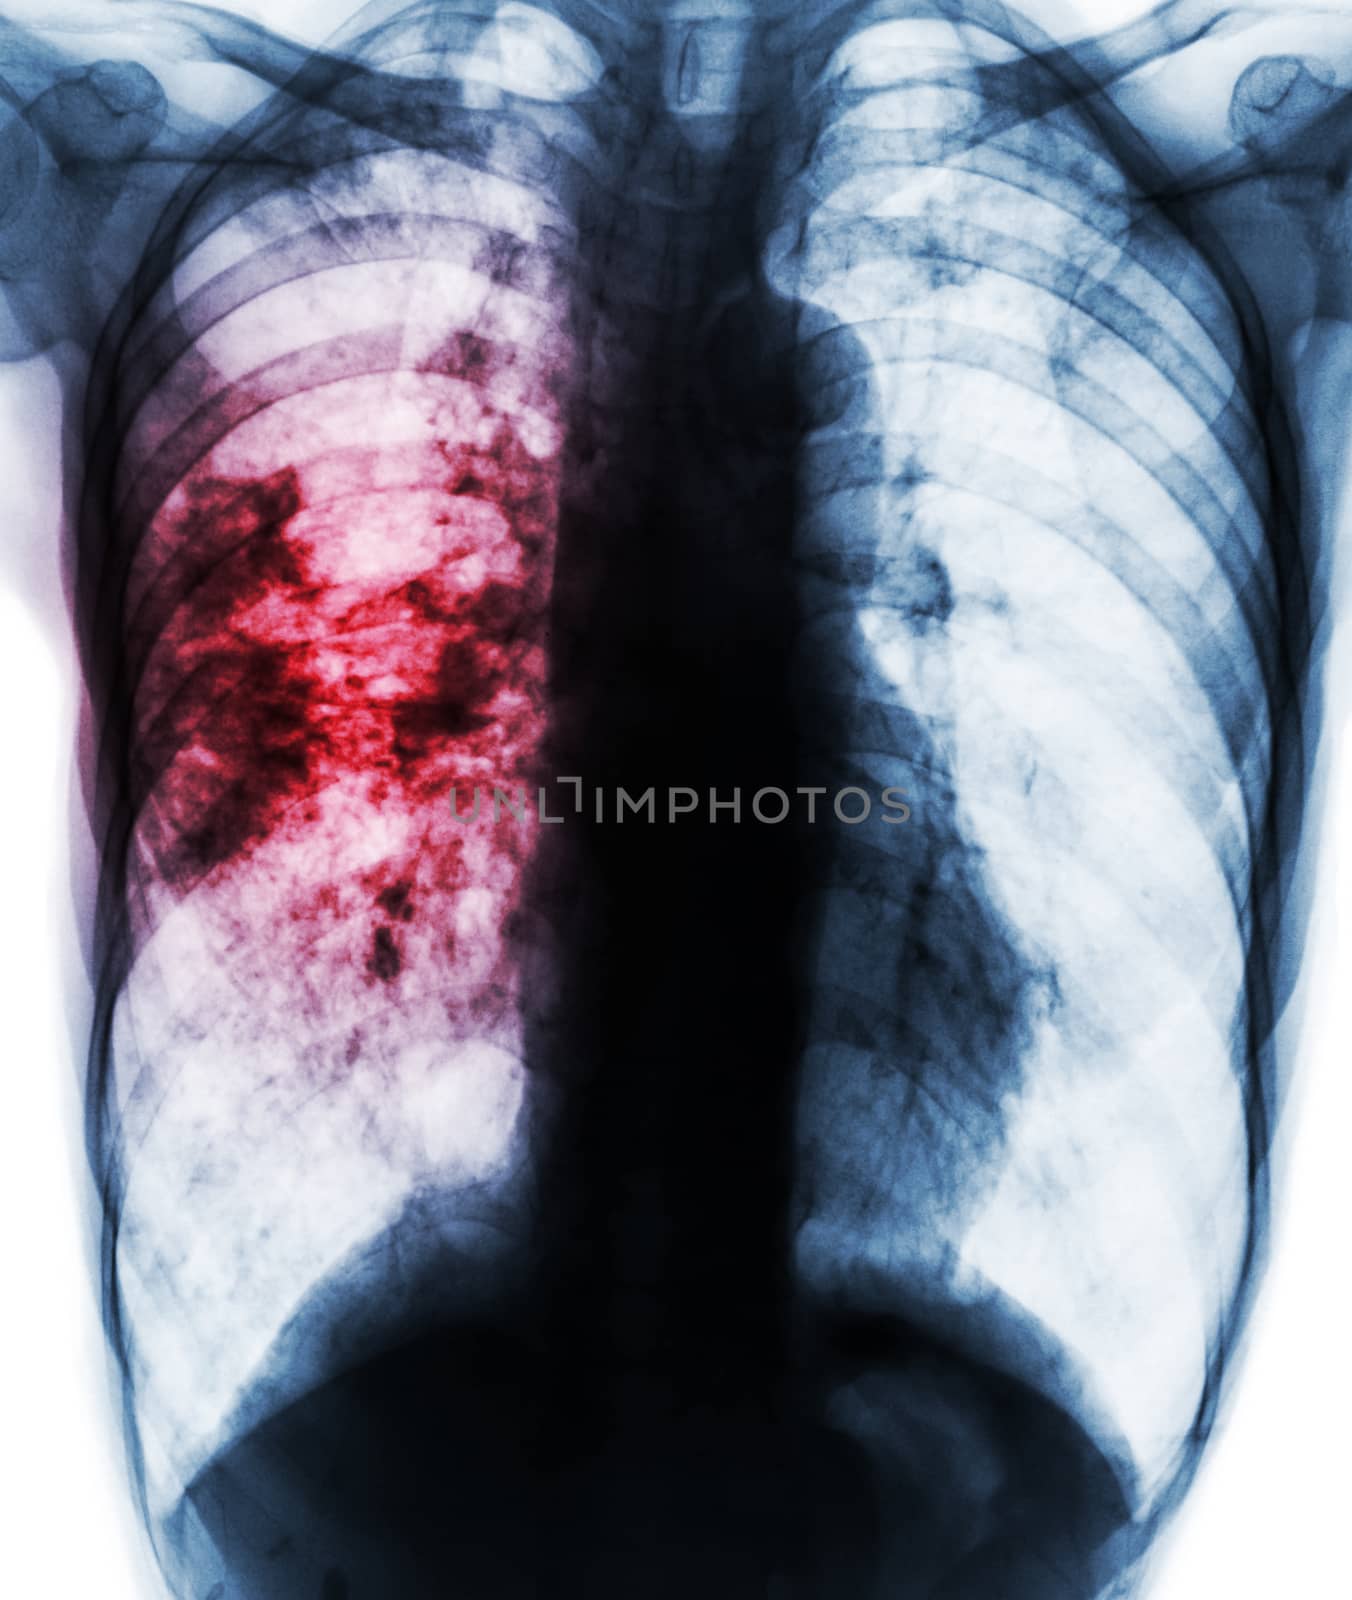 Pulmonary tuberculosis . Film x-ray of chest show patchy infiltrate at right lung due to TB infection by stockdevil